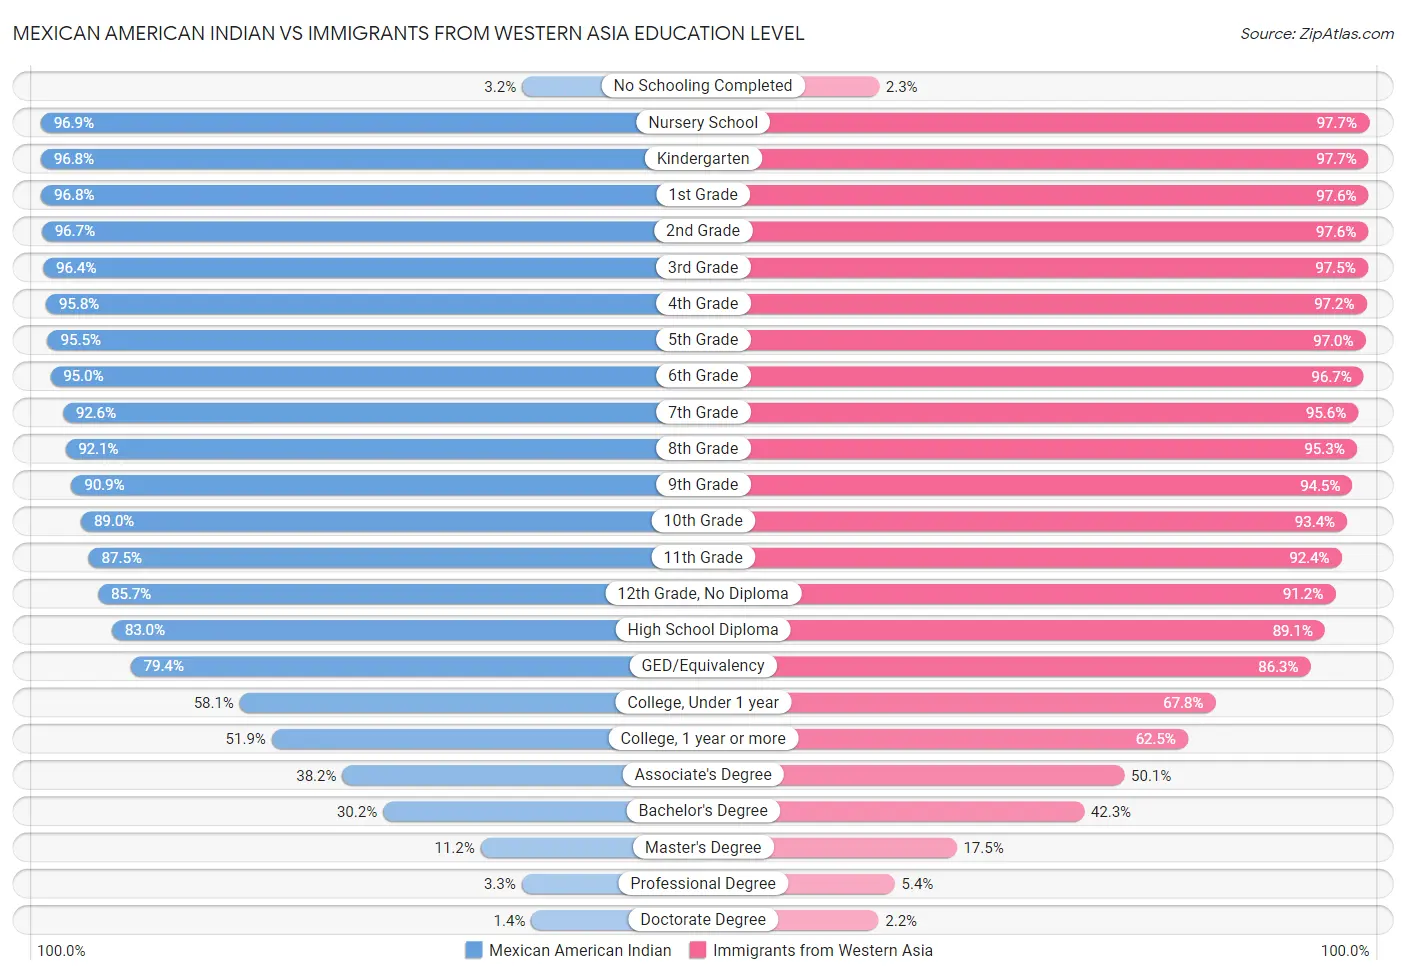 Mexican American Indian vs Immigrants from Western Asia Education Level